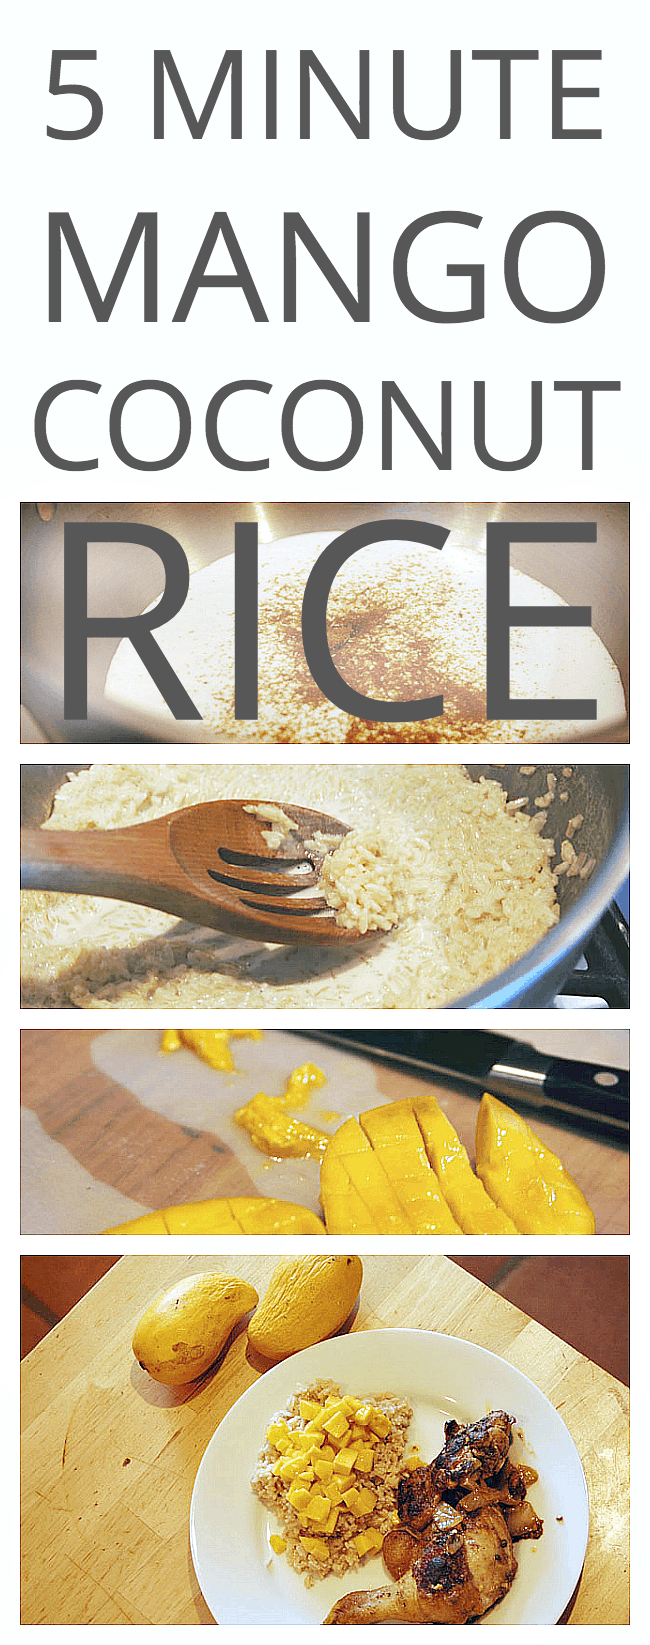 Mango coconut rice that can be on the table in 5 MINUTES FLAT!